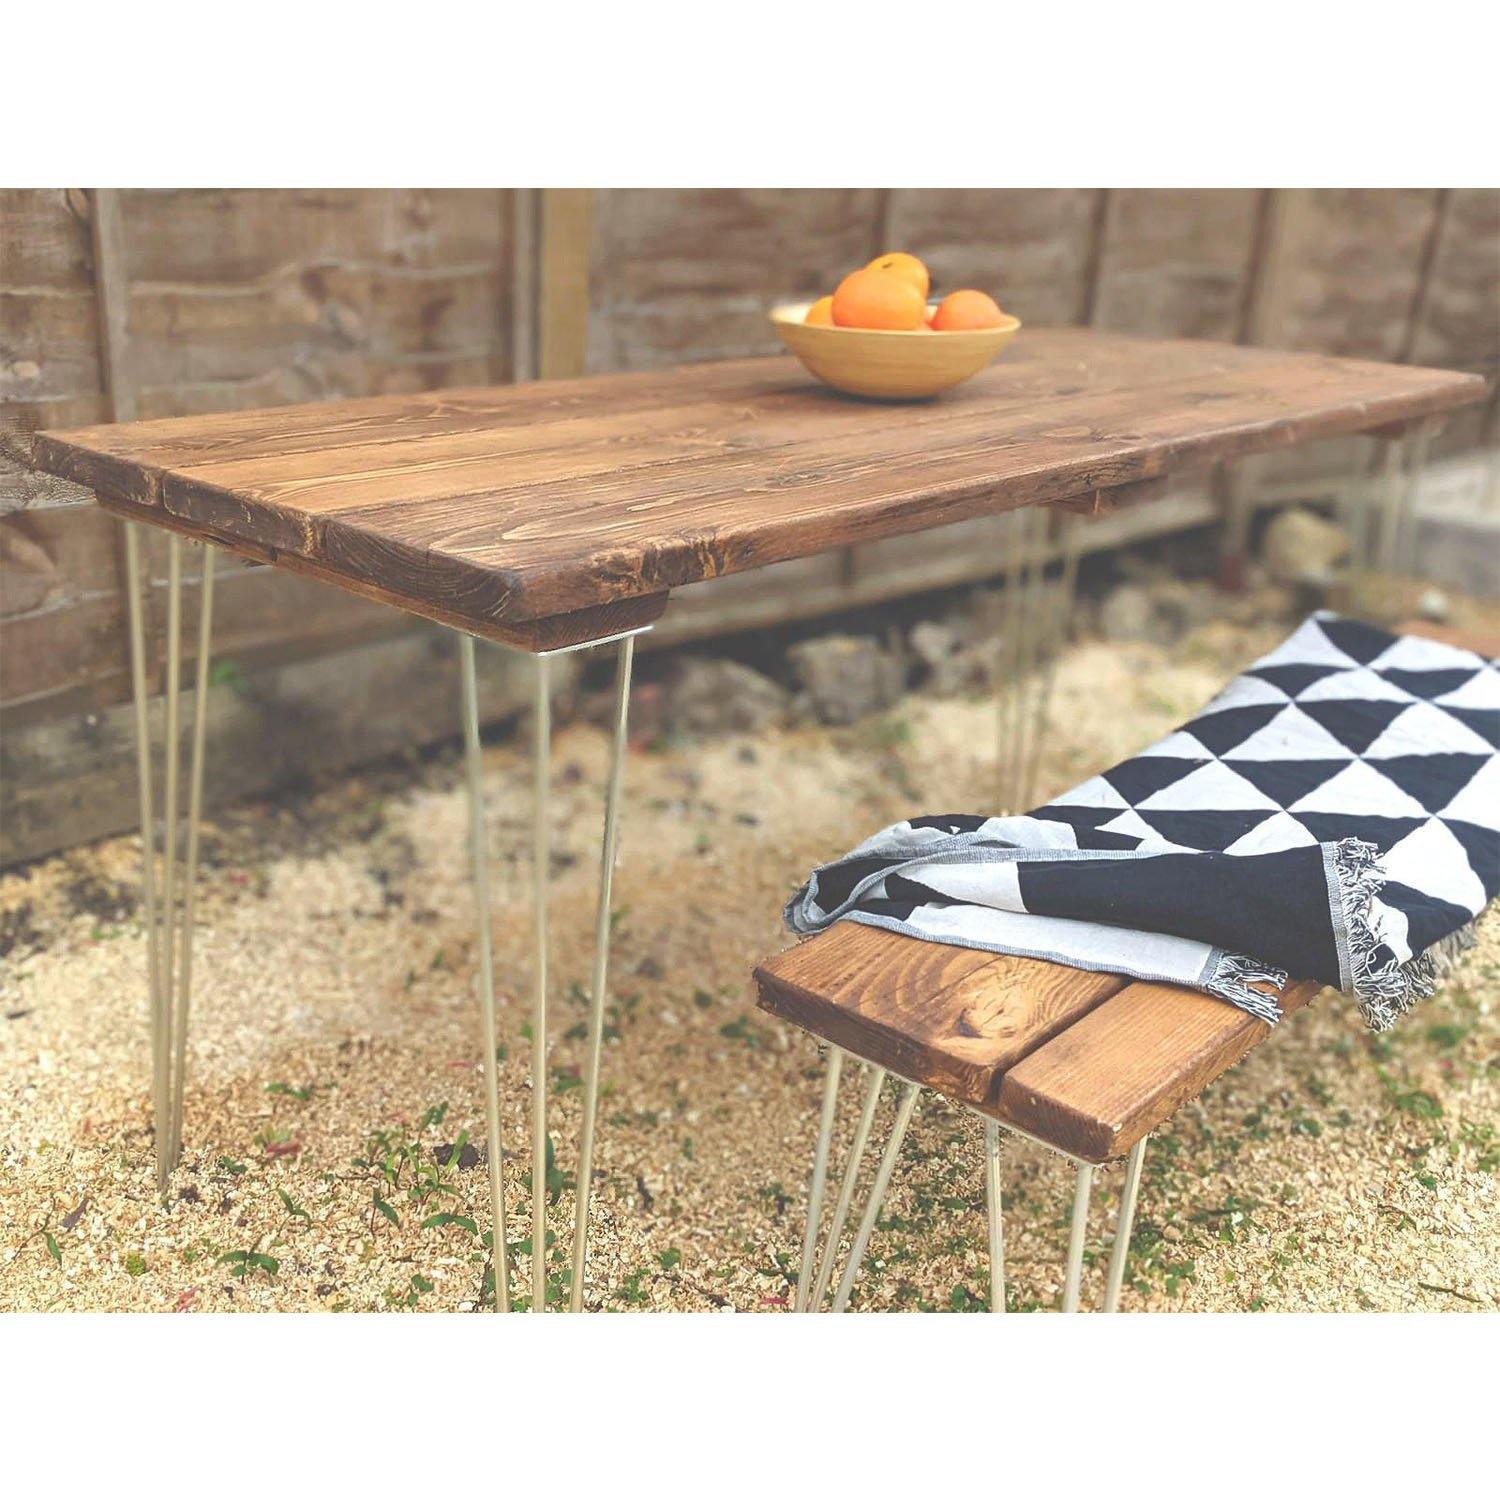 Garden Table with Galvanised Hairpins - RizAndMicaMake